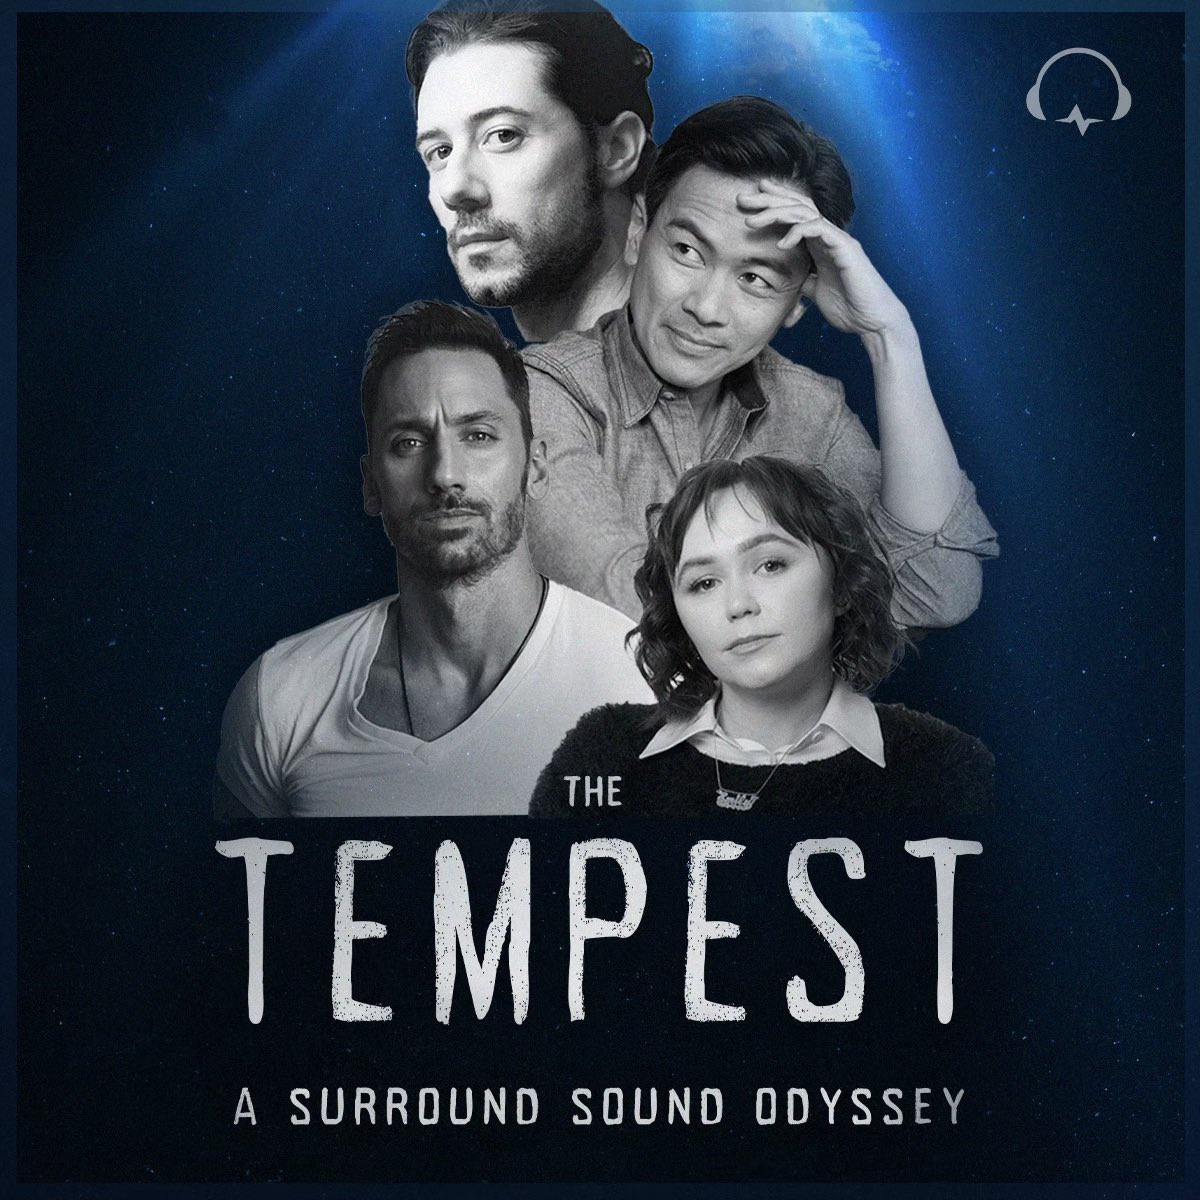 Some friends made an amazingly immersive surround sound experience of William Shakespeare’s ‘The Tempest’ It’s only available until March 16th Give it a listen and be sure to use headphones 👇🏽👇🏽👇🏽👇🏽👇🏽👇🏽👇🏽👇🏽👇🏽👇🏽 knockatthegate.com